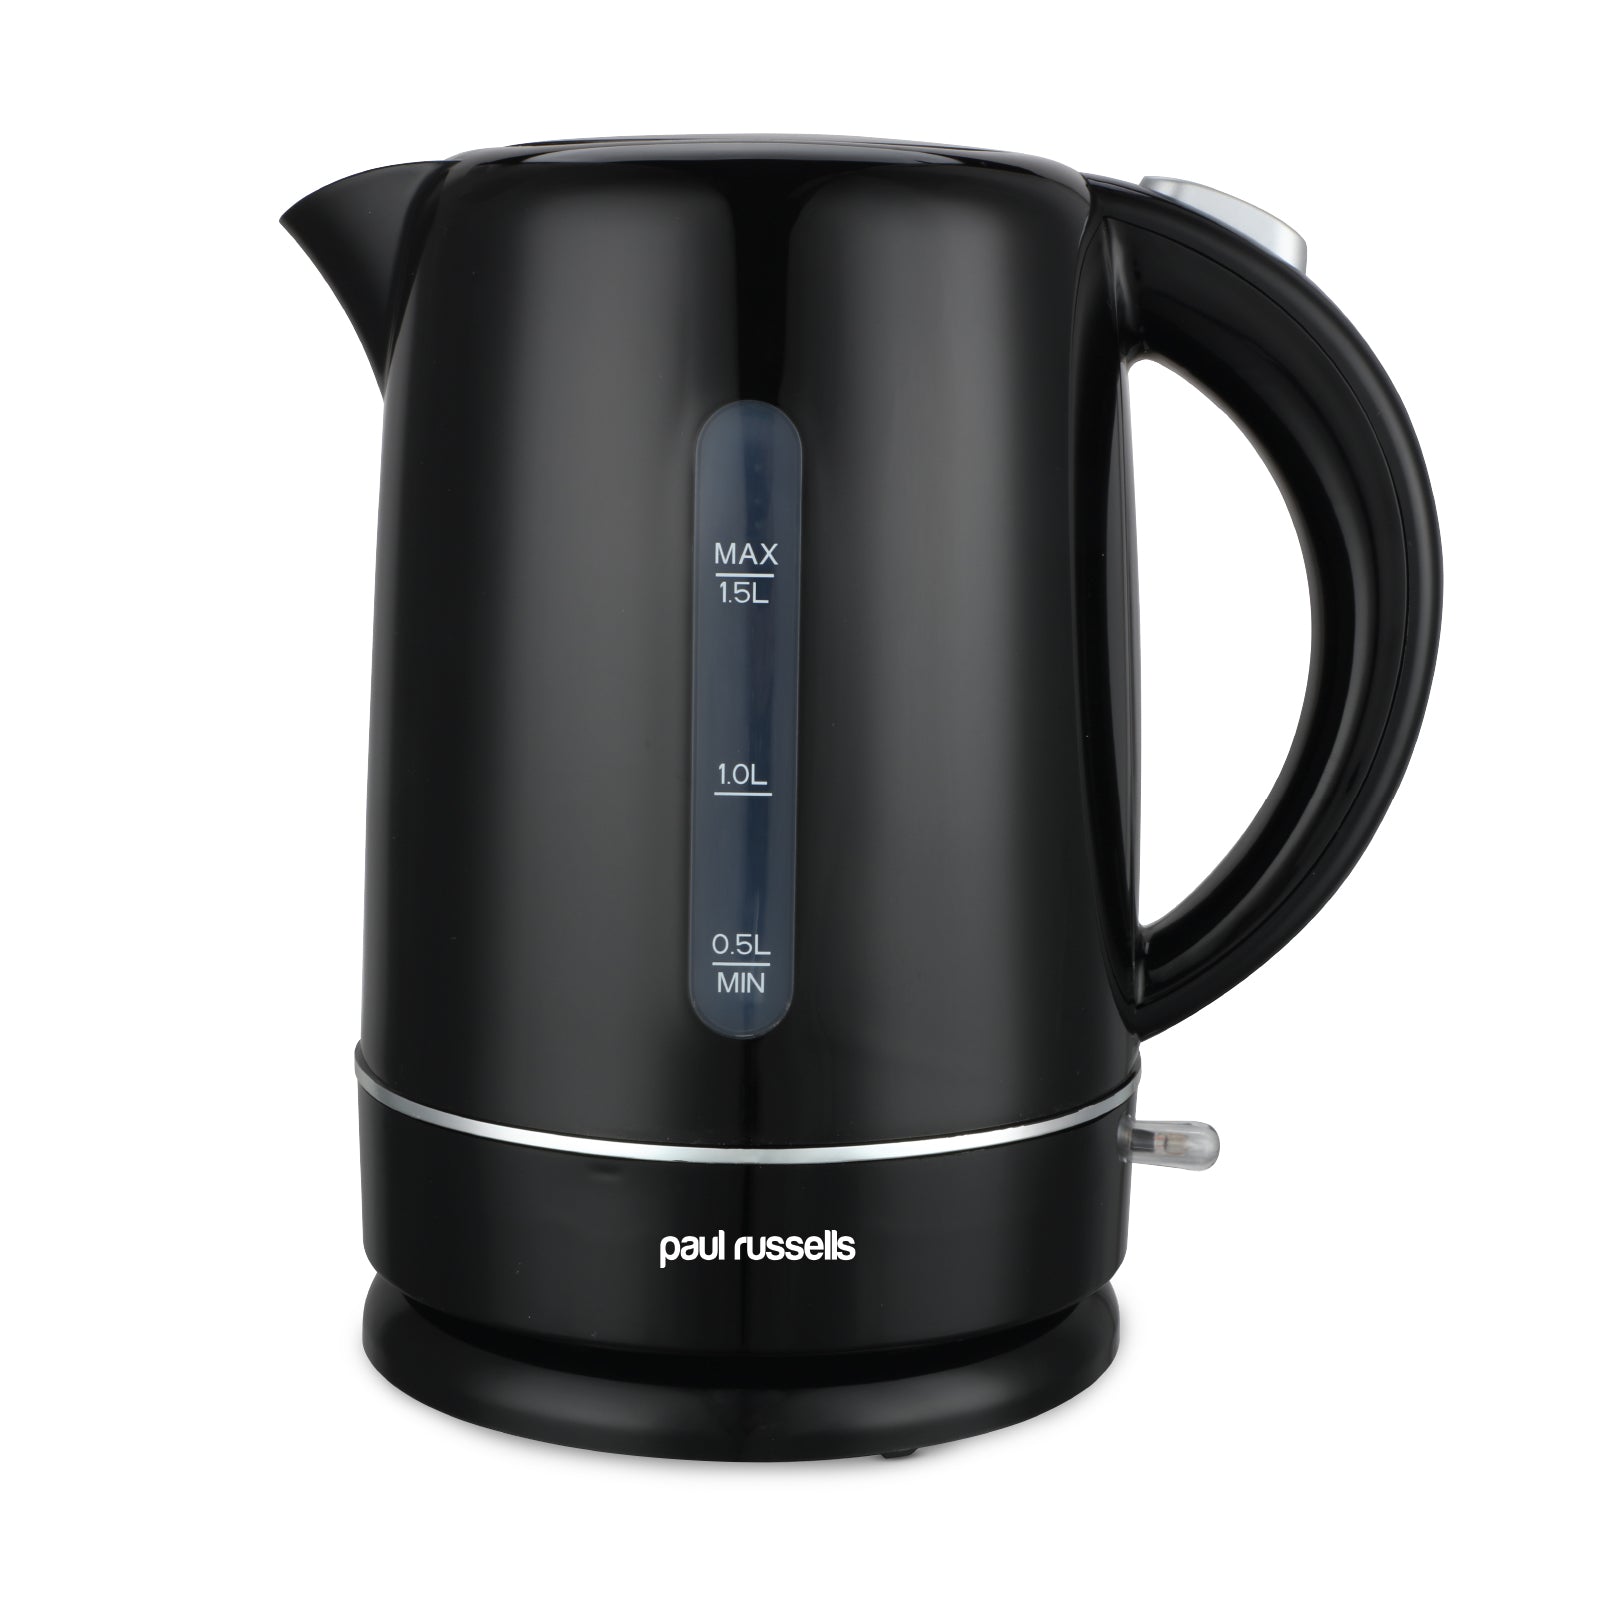 Paul Russells 3000W Cordless Electric Kettle - Ideal for Tea or Coffee Enthusiasts, 1.5L Capacity, Auto Shut Off, Transparent Water Window, 360° Swivel Base, Effortless Auto Lid Opening